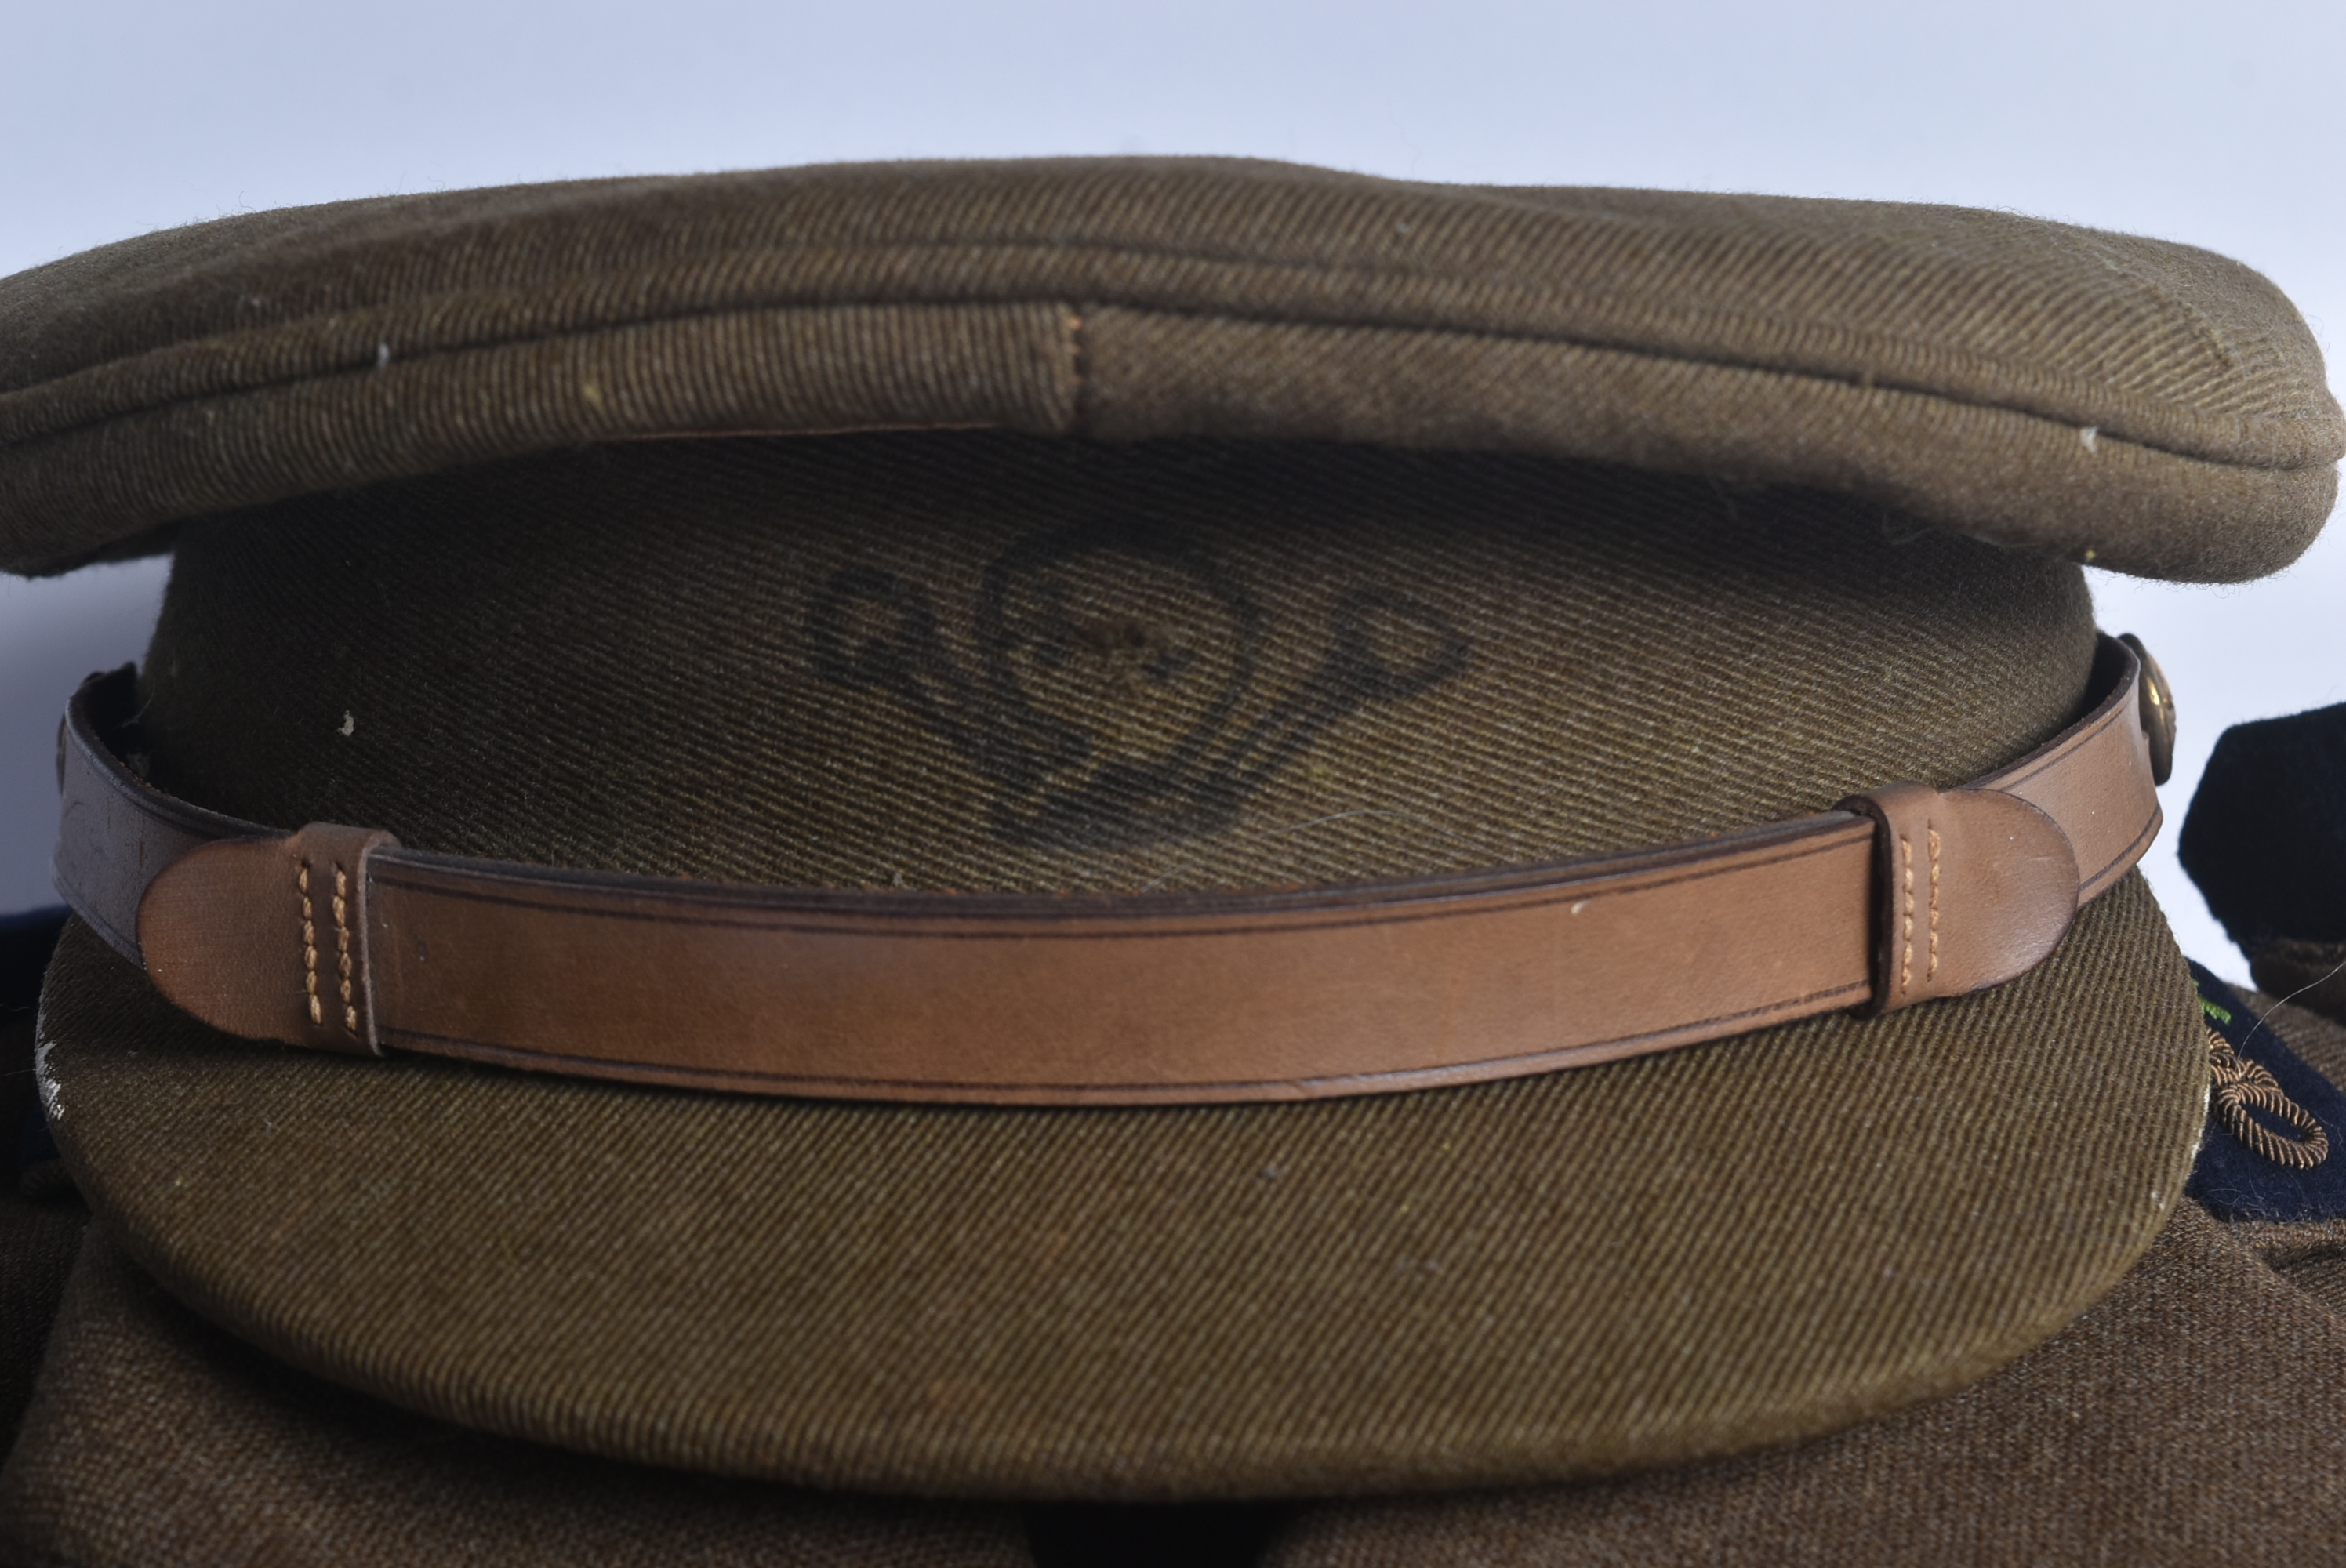 FRENCH OFFICER'S UNIFORM WORN BY LTC MIKSCHE WITH CAP - Image 3 of 9